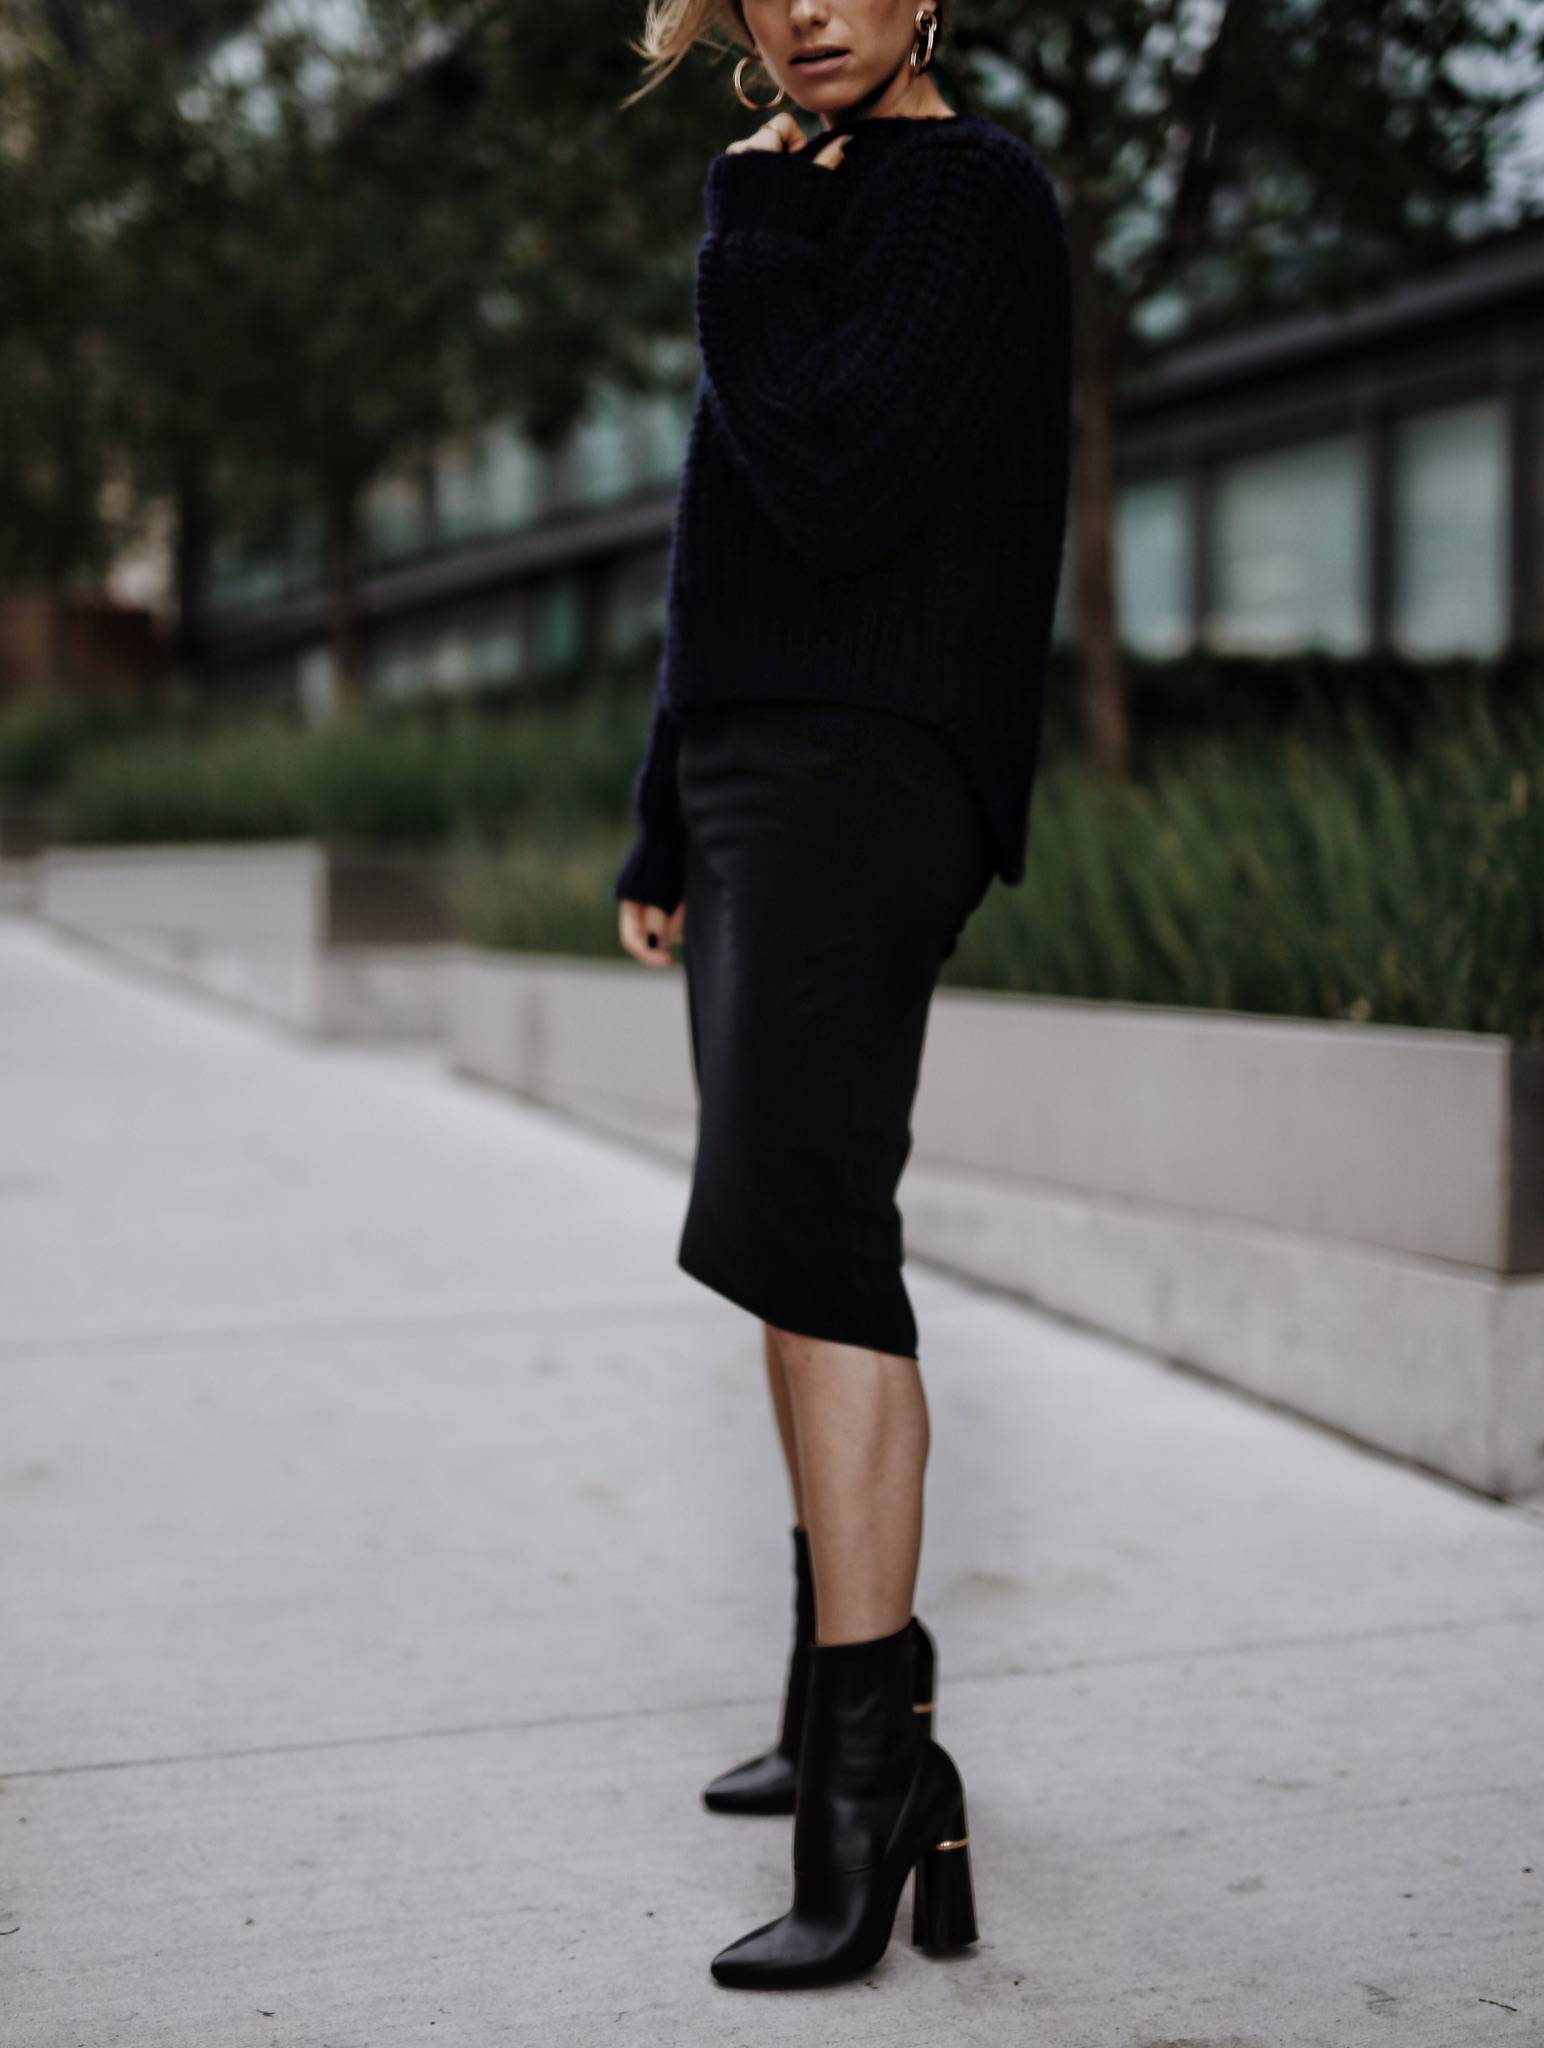 Style and beauty blogger Jill Lansky of The August Diaries shows how to wear black and navy together in a black slip dress and navy sweater with 3.1 Phillip Lim Kyoto boots